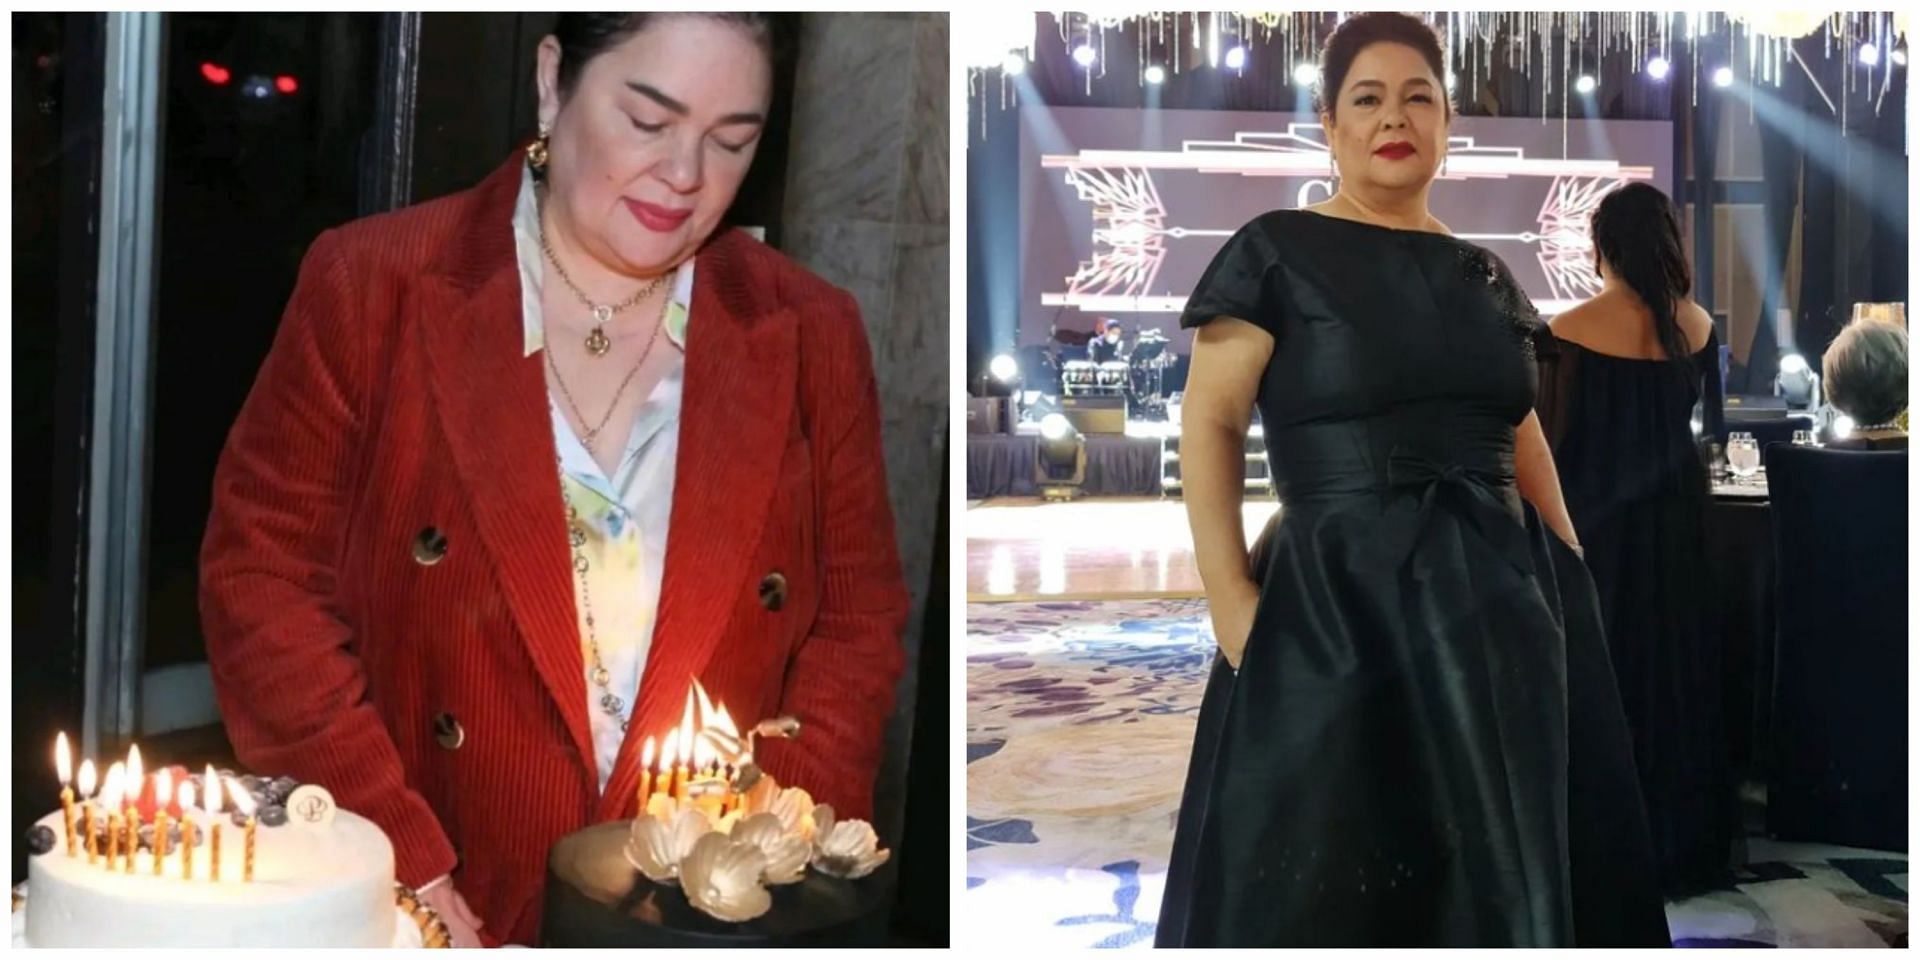 Social media users mourn the passing away of Jaclyn Jose, a popular Filipino actress. (Image via @JaclynJose/ Instagram)